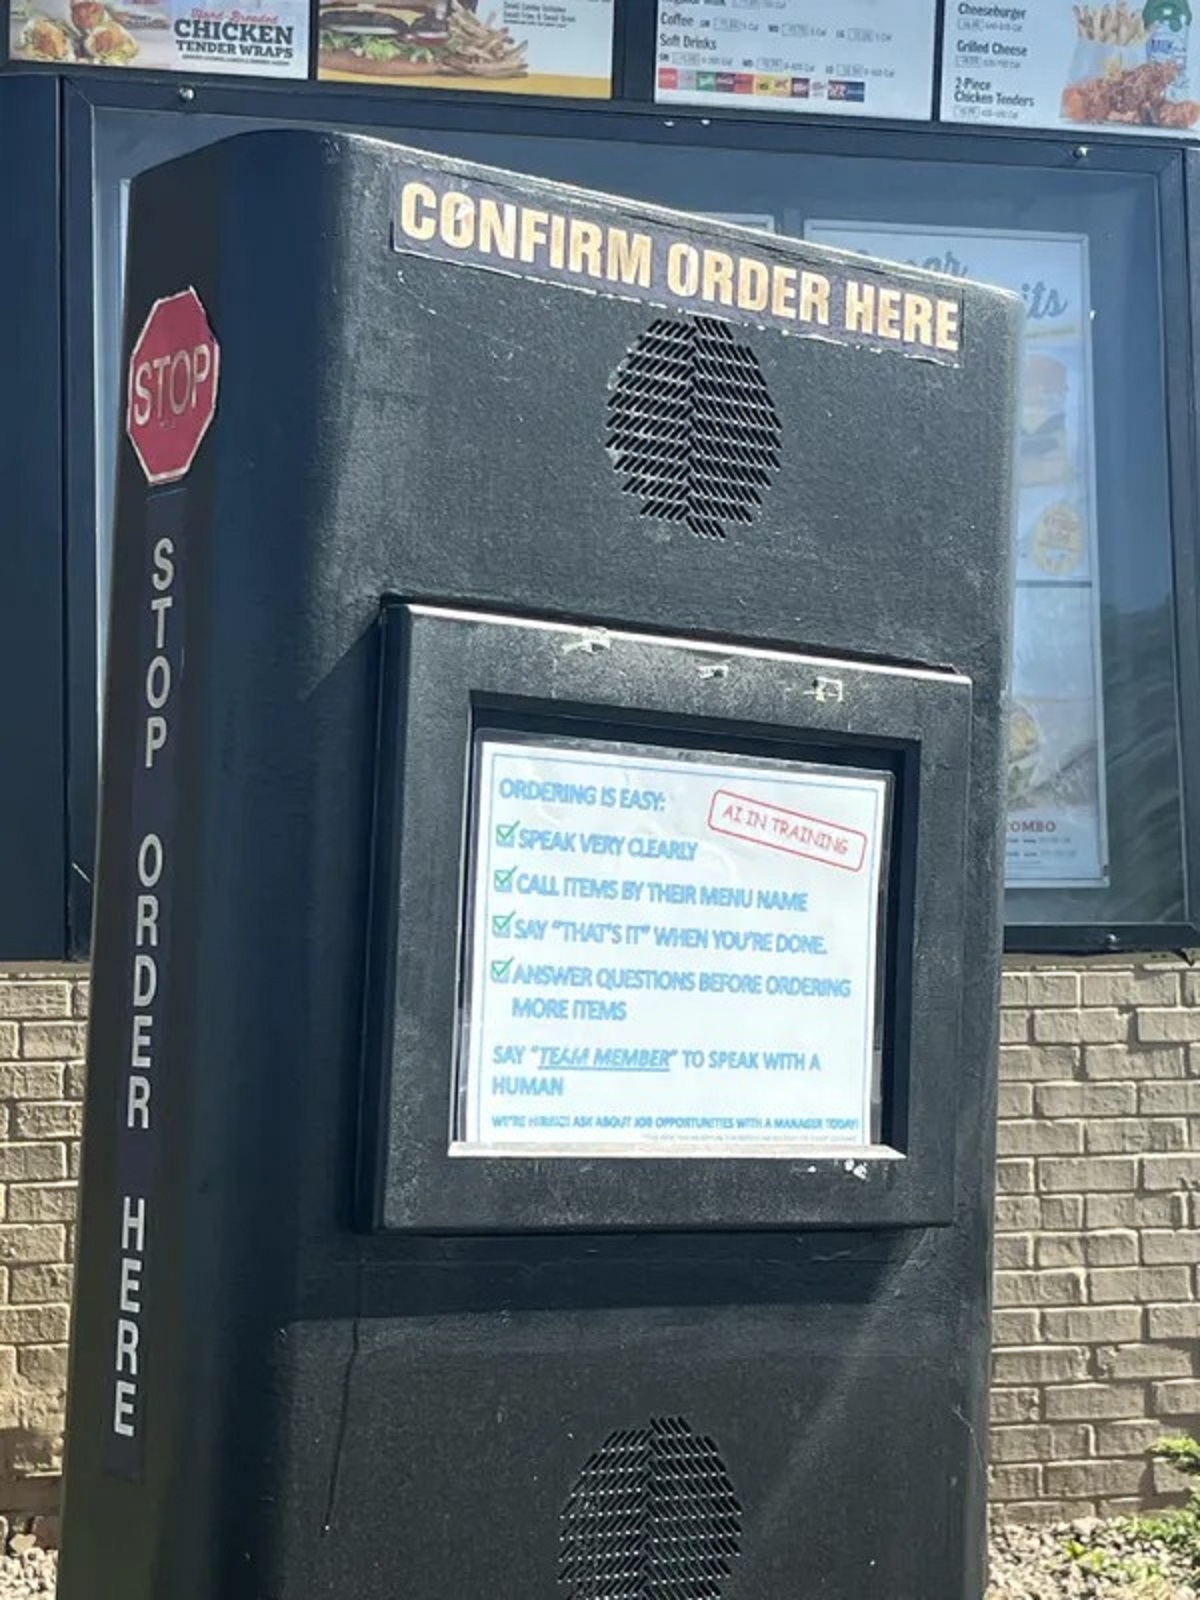 Drive-through - Chicken is Stop S T Confirm Order Here Stop Order Here Ordering Seat Speak Very Clar Altr Call Items By Their Moun "You'Re Done Swer Questions One Ordering More T Saam Member To Speak With Human